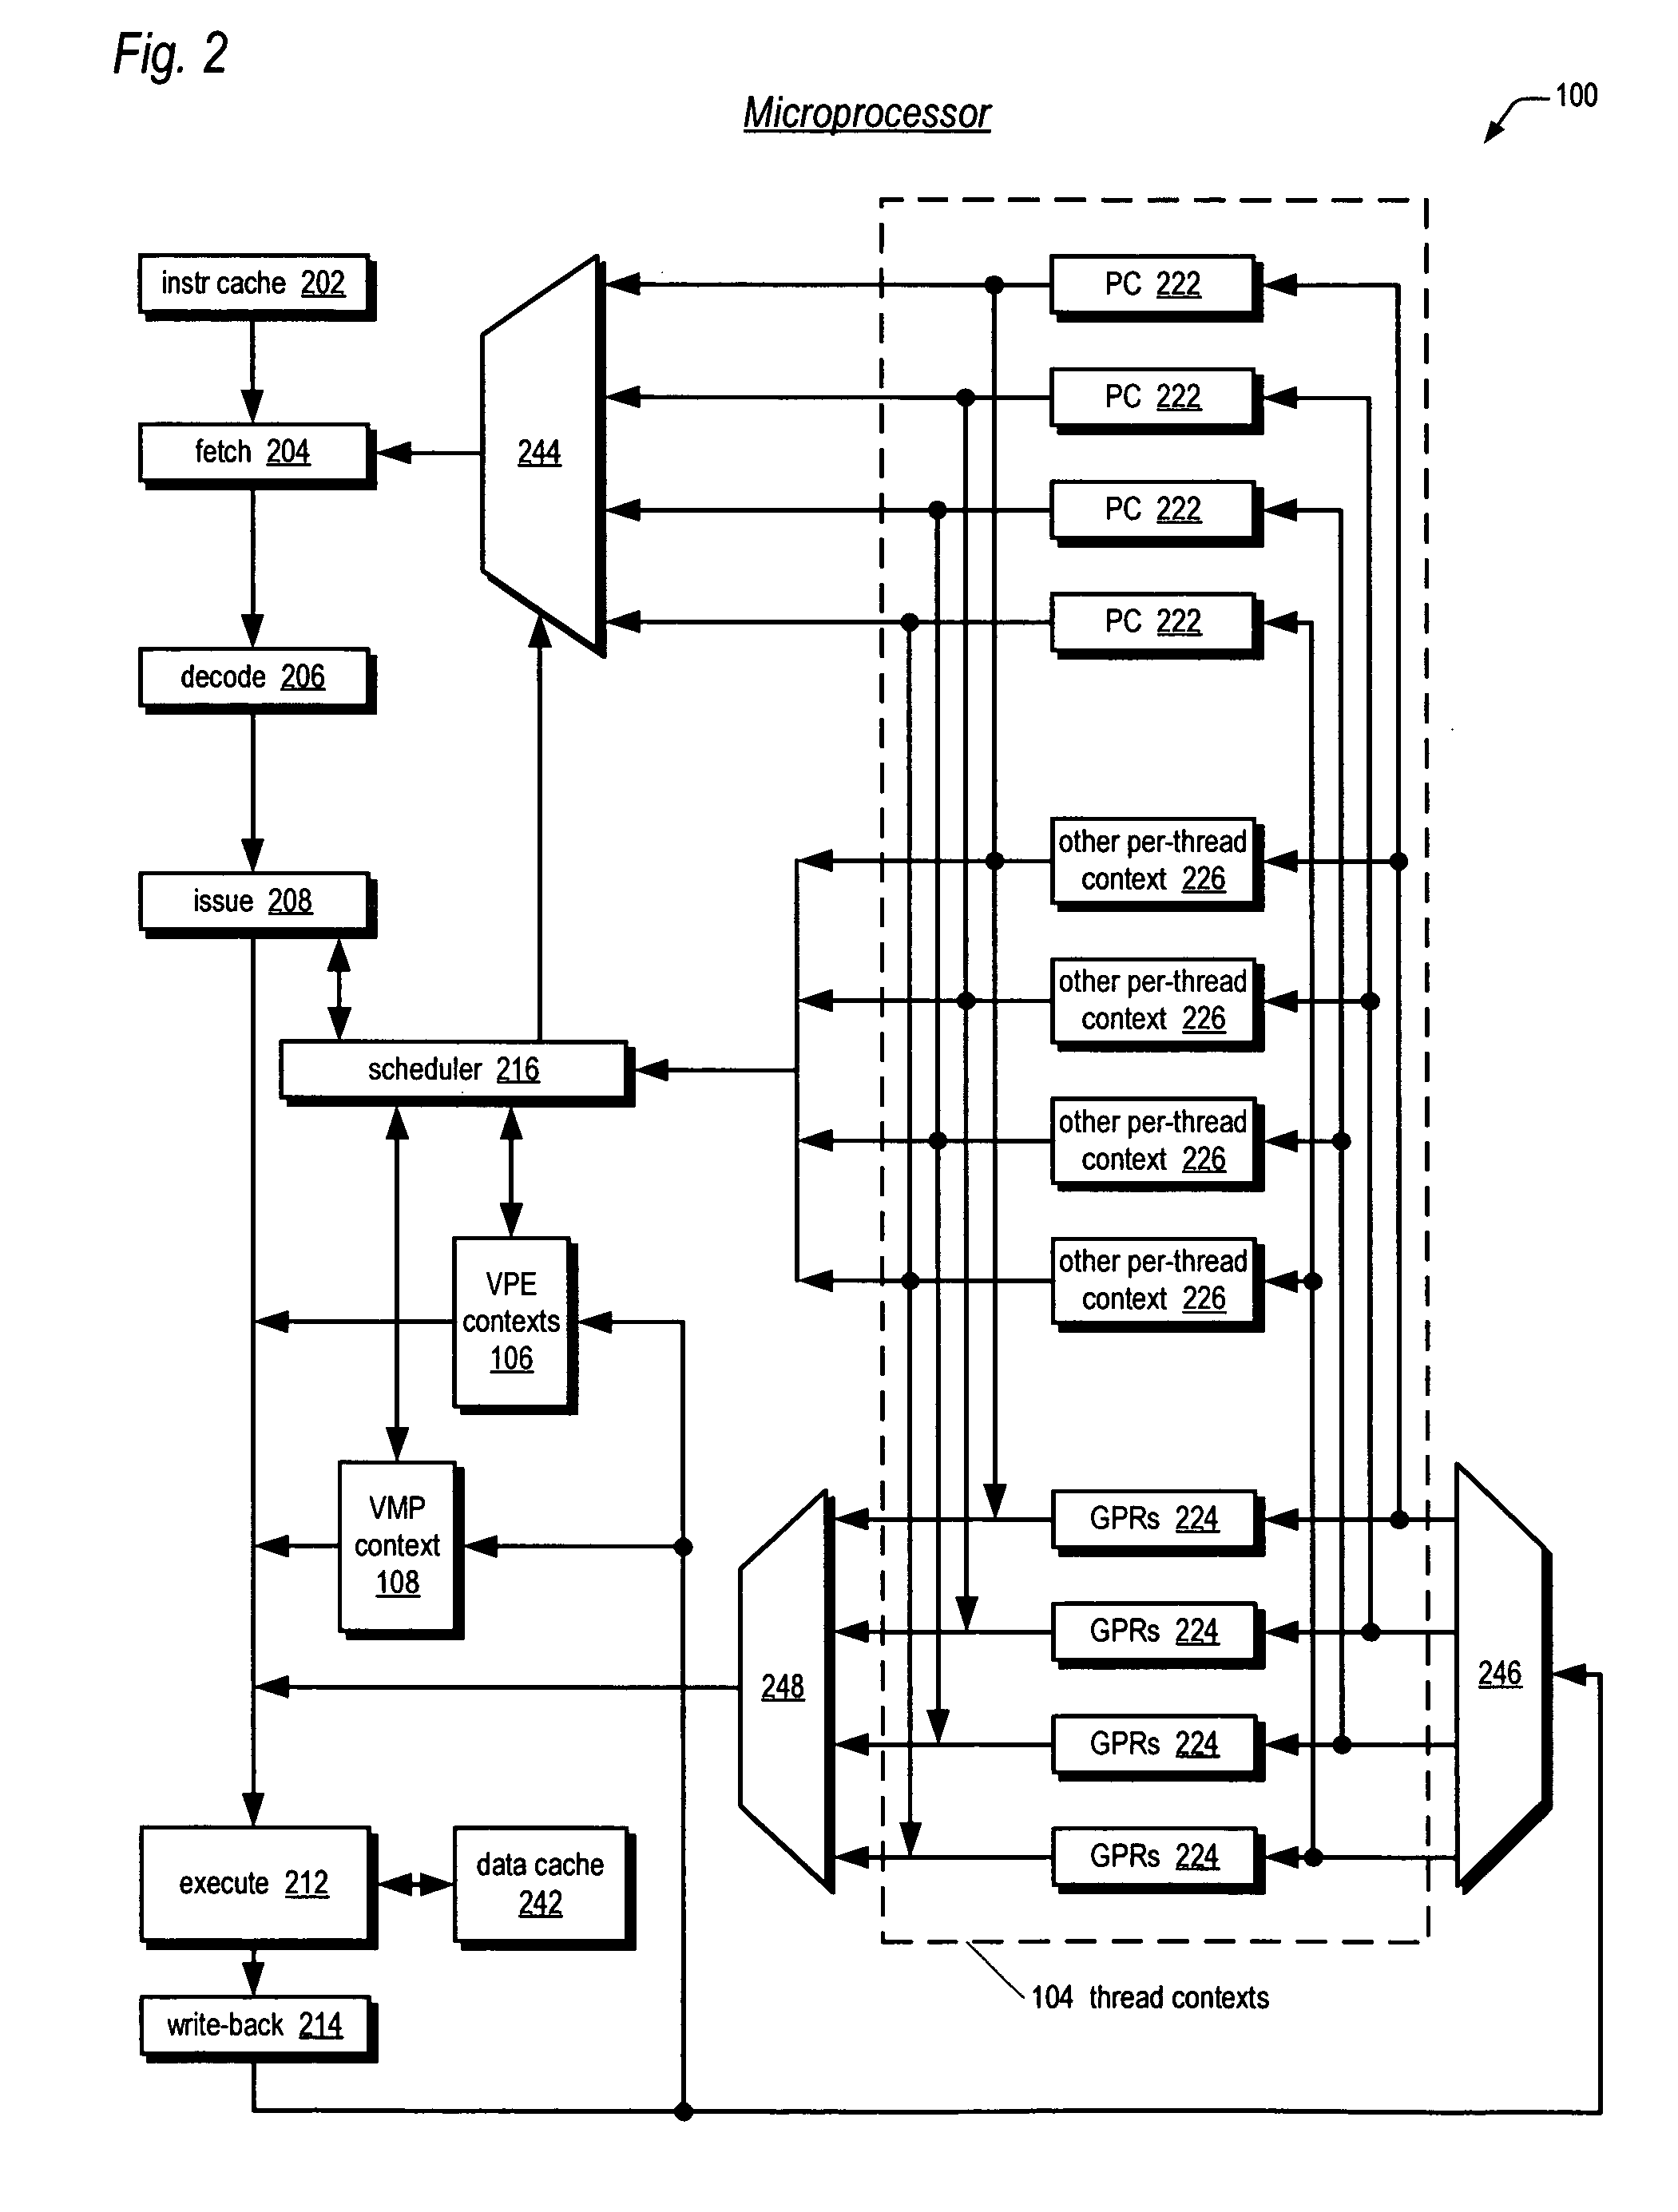 Software emulation of directed exceptions in a multithreading processor